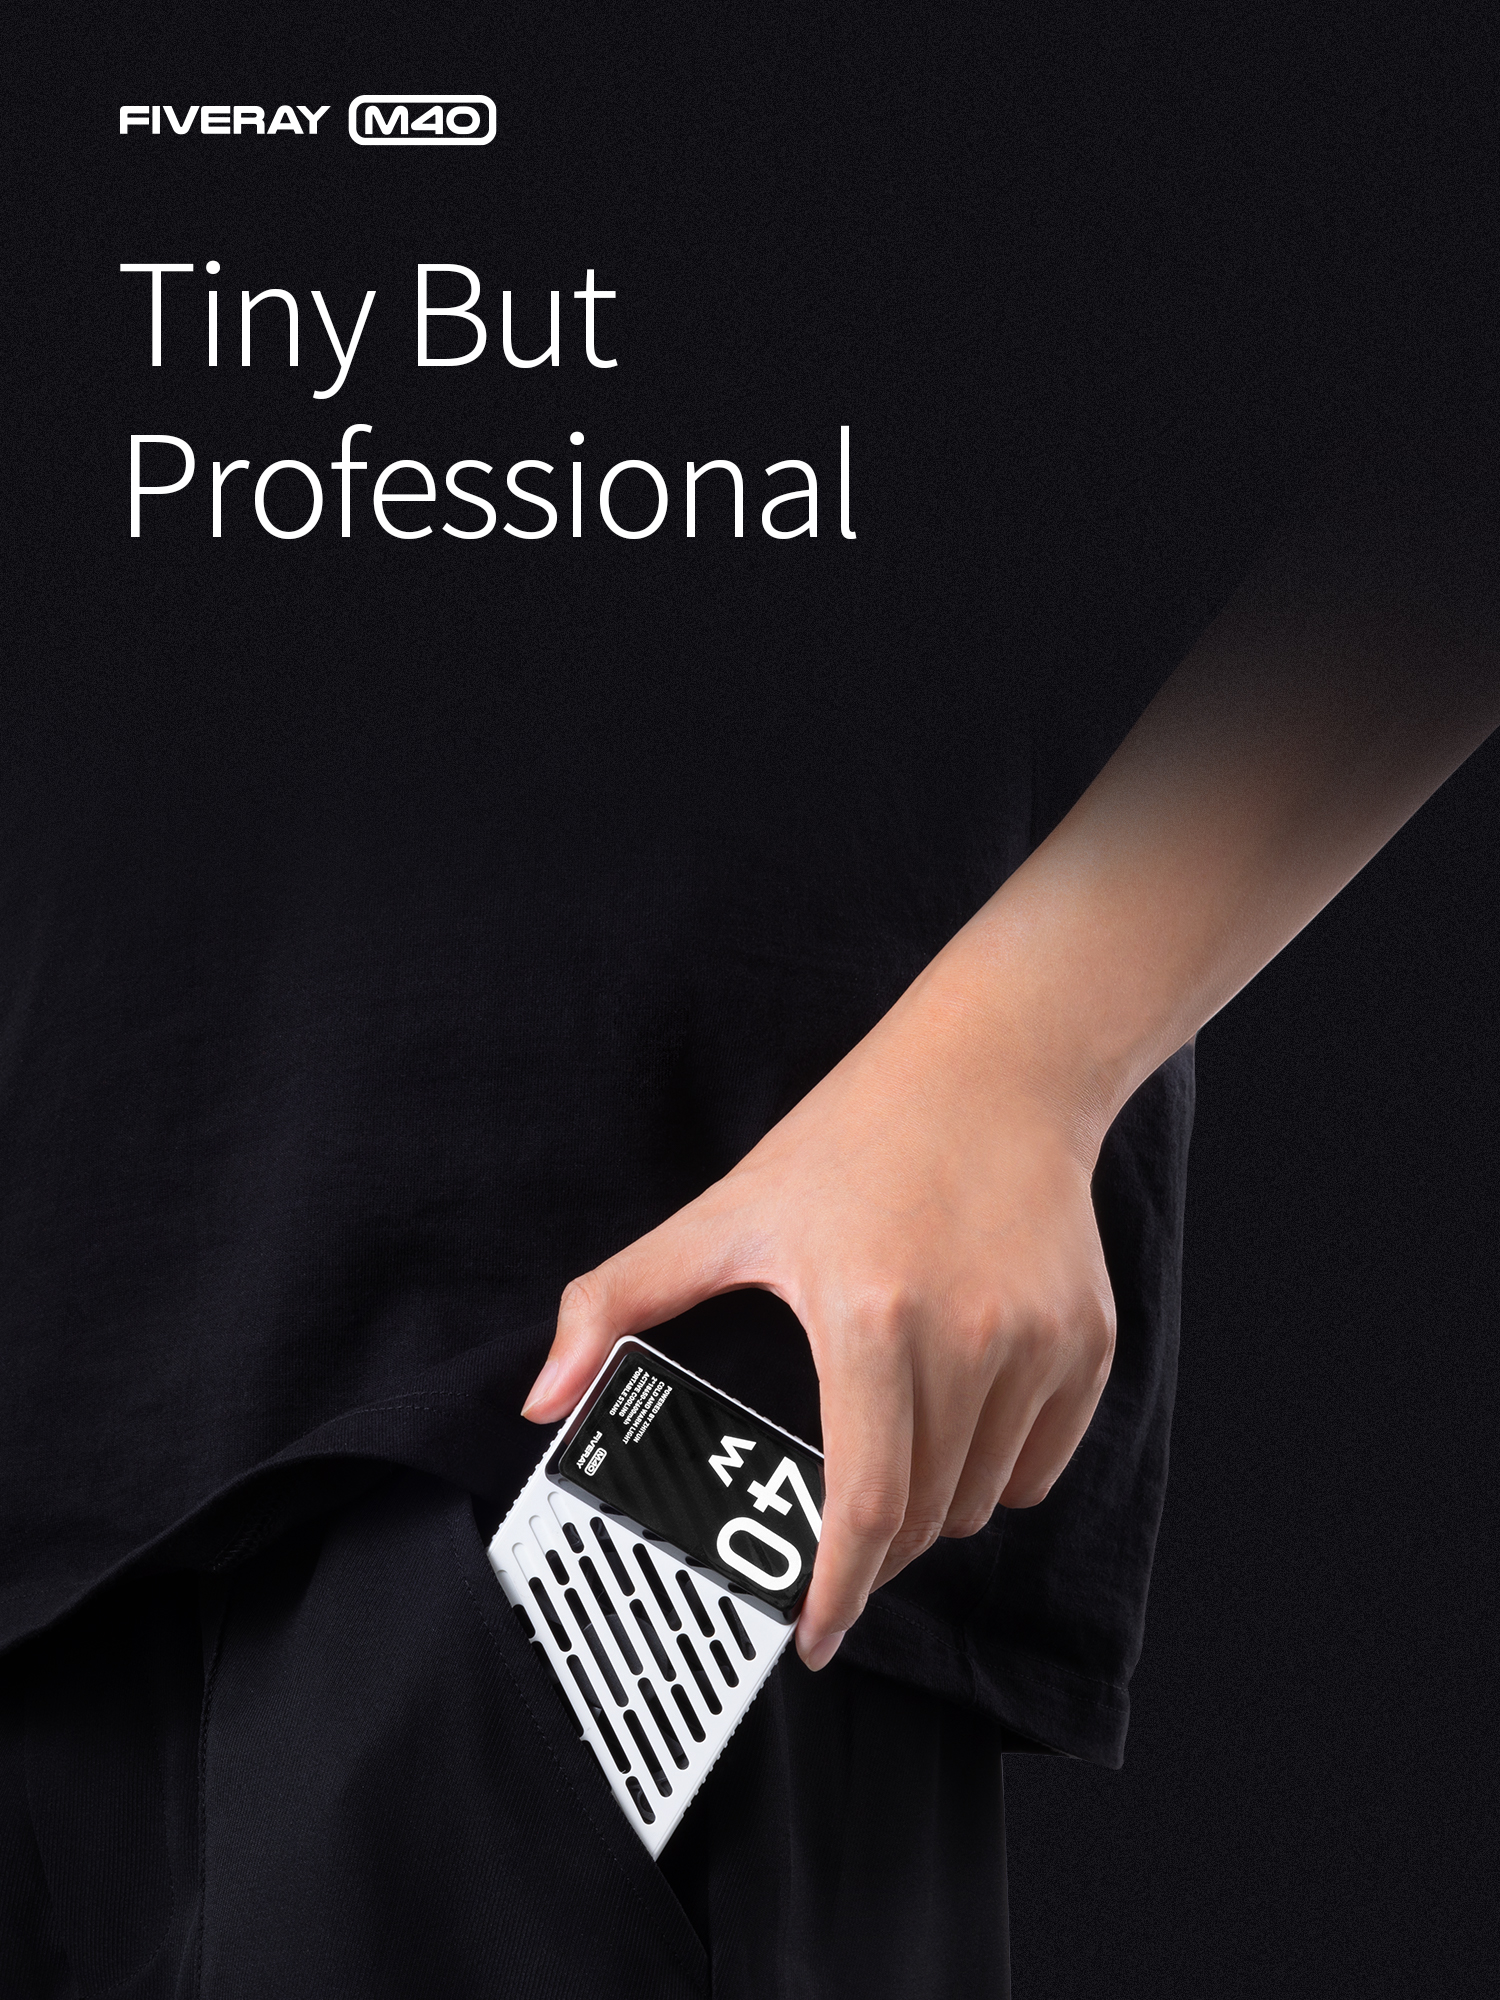 Tiny but Professional